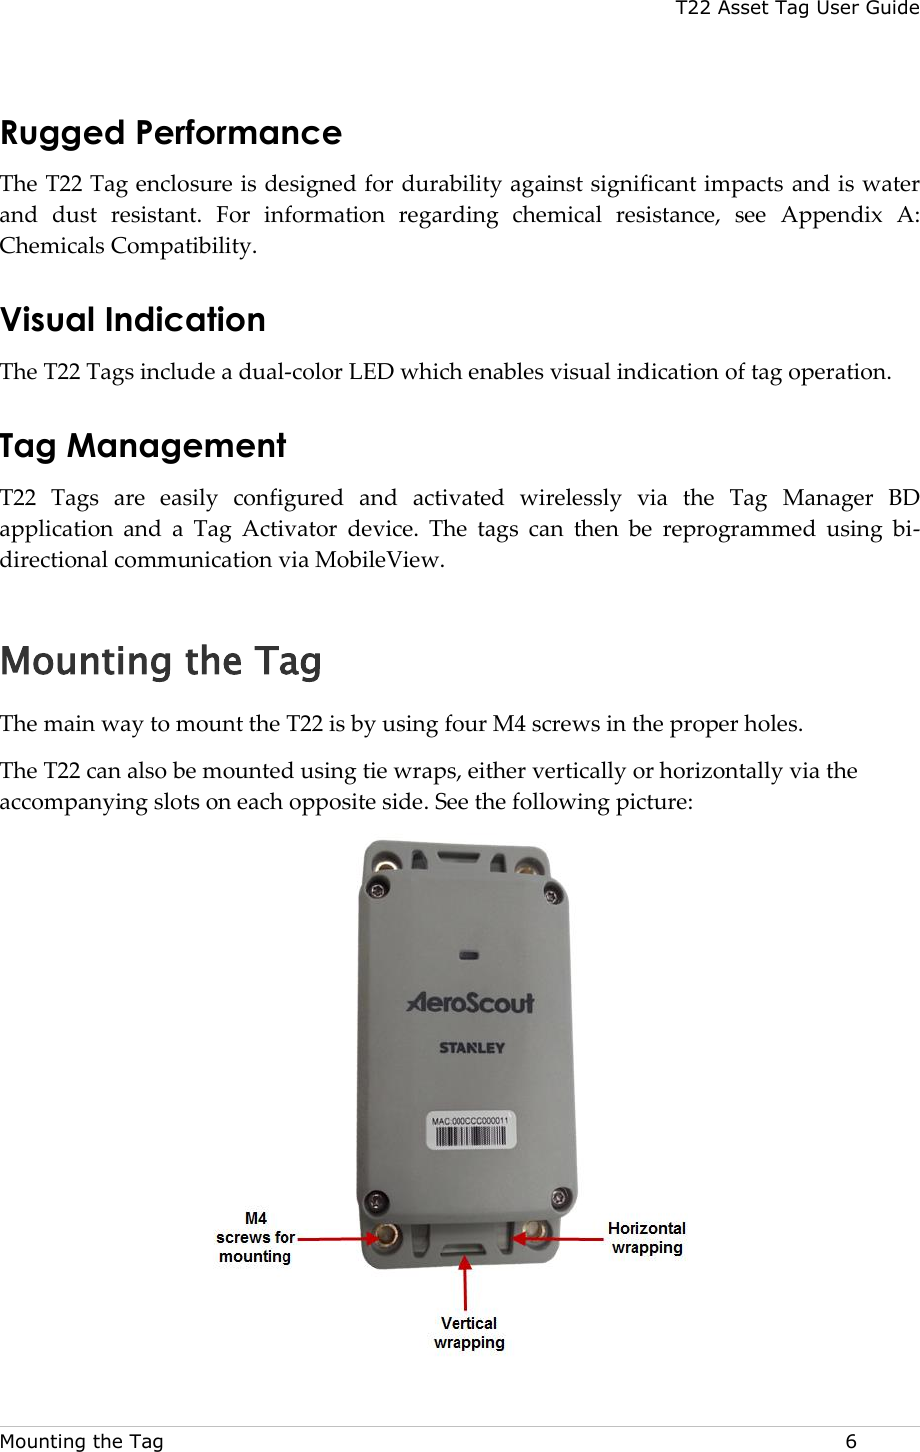 T22 Asset Tag User Guide Mounting the Tag  6 Rugged Performance  The T22 Tag enclosure is designed for durability against significant impacts and is water and  dust  resistant.  For  information  regarding  chemical  resistance,  see  Appendix  A: Chemicals Compatibility. Visual Indication  The T22 Tags include a dual-color LED which enables visual indication of tag operation. Tag Management T22  Tags  are  easily  configured  and  activated  wirelessly  via  the  Tag  Manager  BD application  and  a  Tag  Activator  device.  The  tags  can  then  be  reprogrammed  using  bi-directional communication via MobileView. Mounting the Tag The main way to mount the T22 is by using four M4 screws in the proper holes. The T22 can also be mounted using tie wraps, either vertically or horizontally via the accompanying slots on each opposite side. See the following picture:   